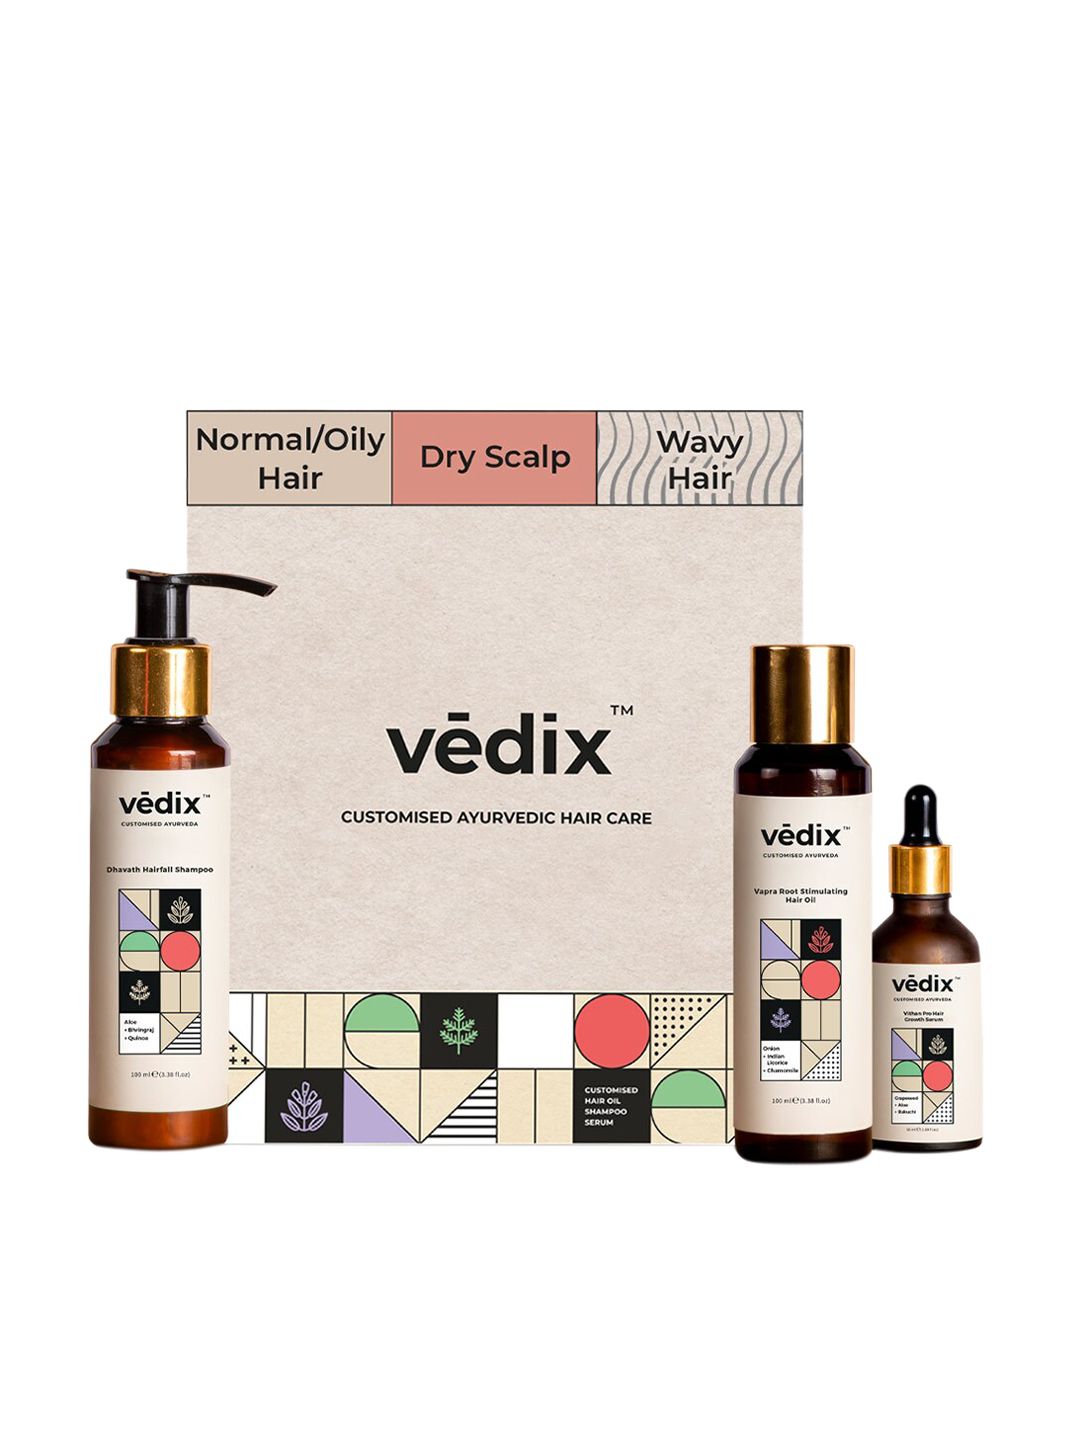 VEDIX Customized Hair Fall Control Regimen for Normal Hair - Dry Scalp Wavy Hair 540 gm Price in India